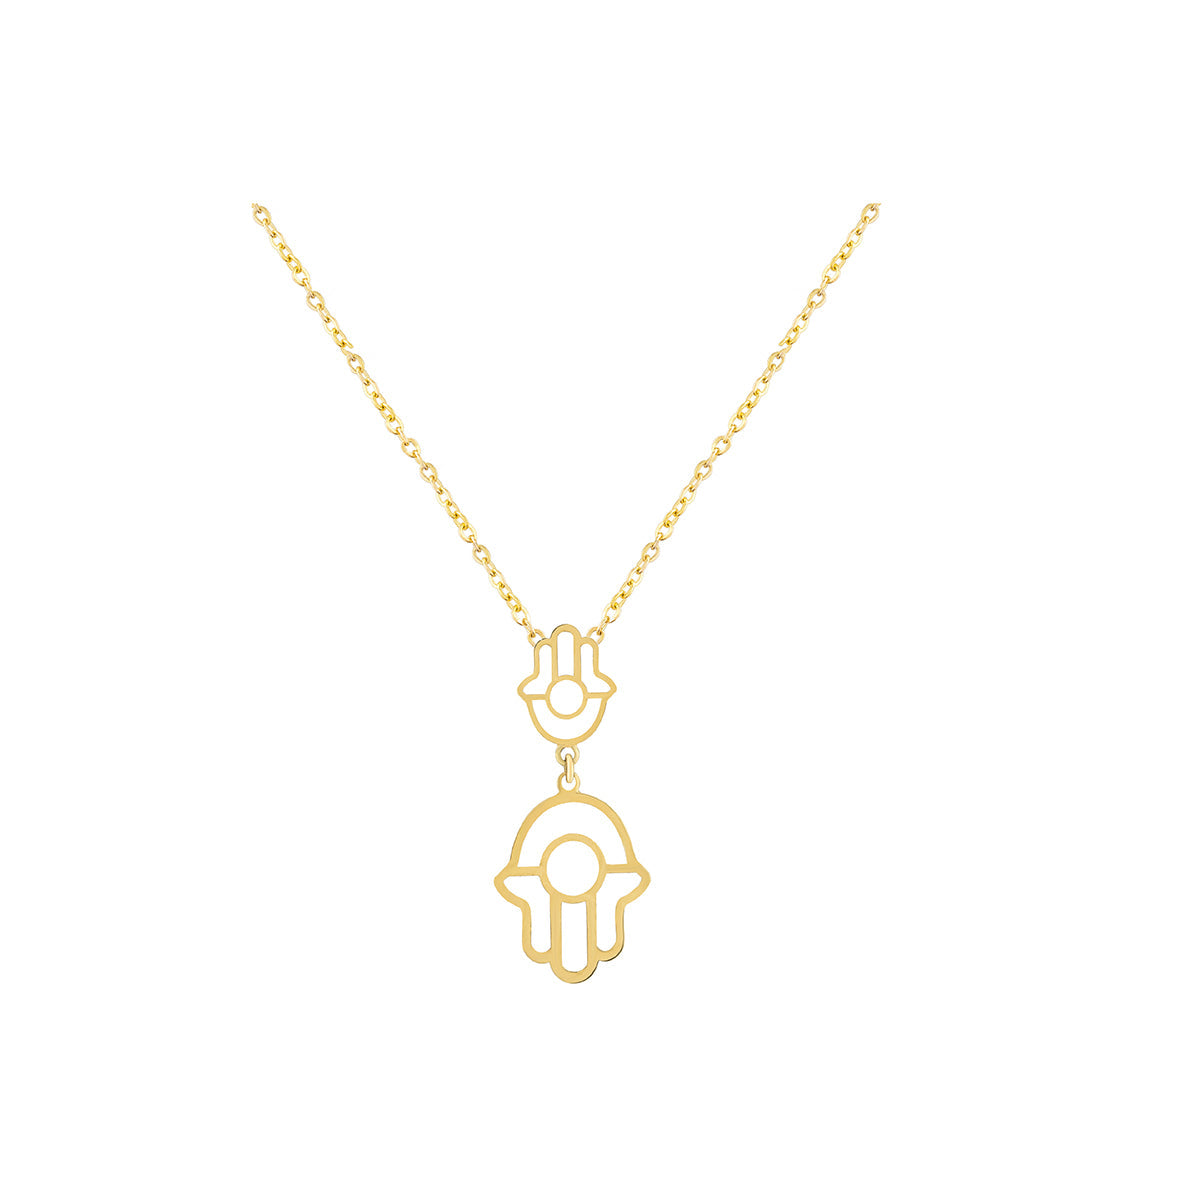 Hamsa Hand Necklace in 18K Yellow gold